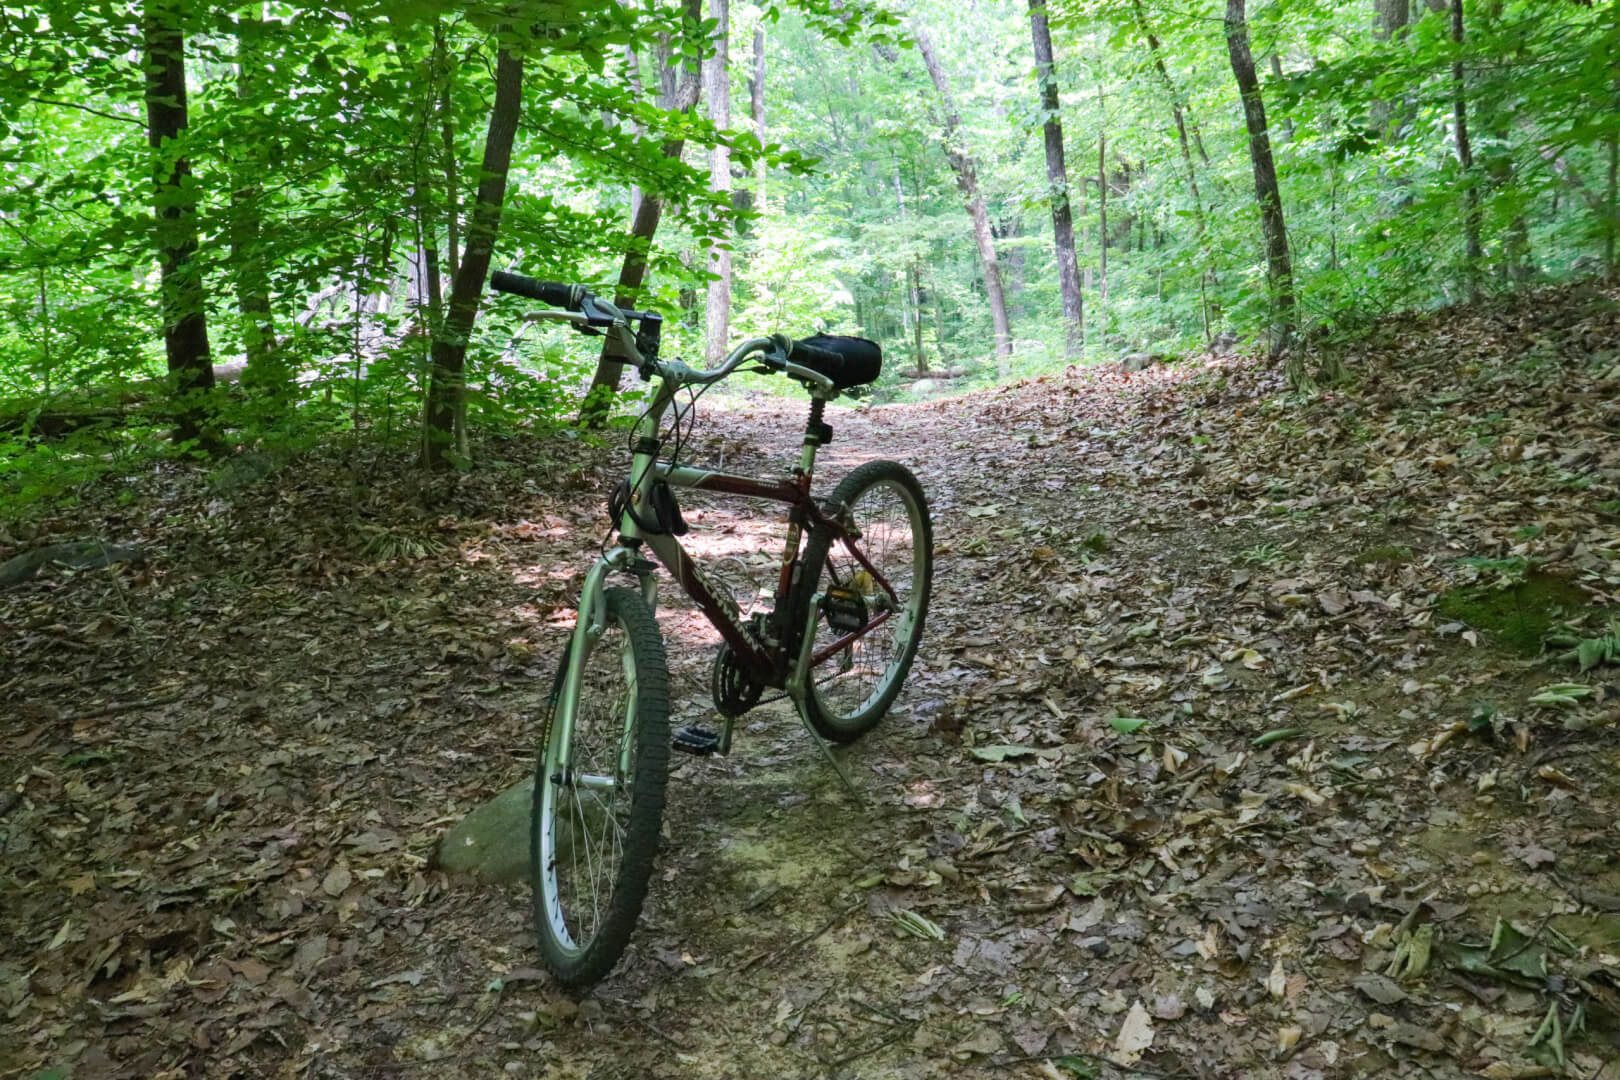 Is This the Secret Trail of Chattanooga Bike Trails?